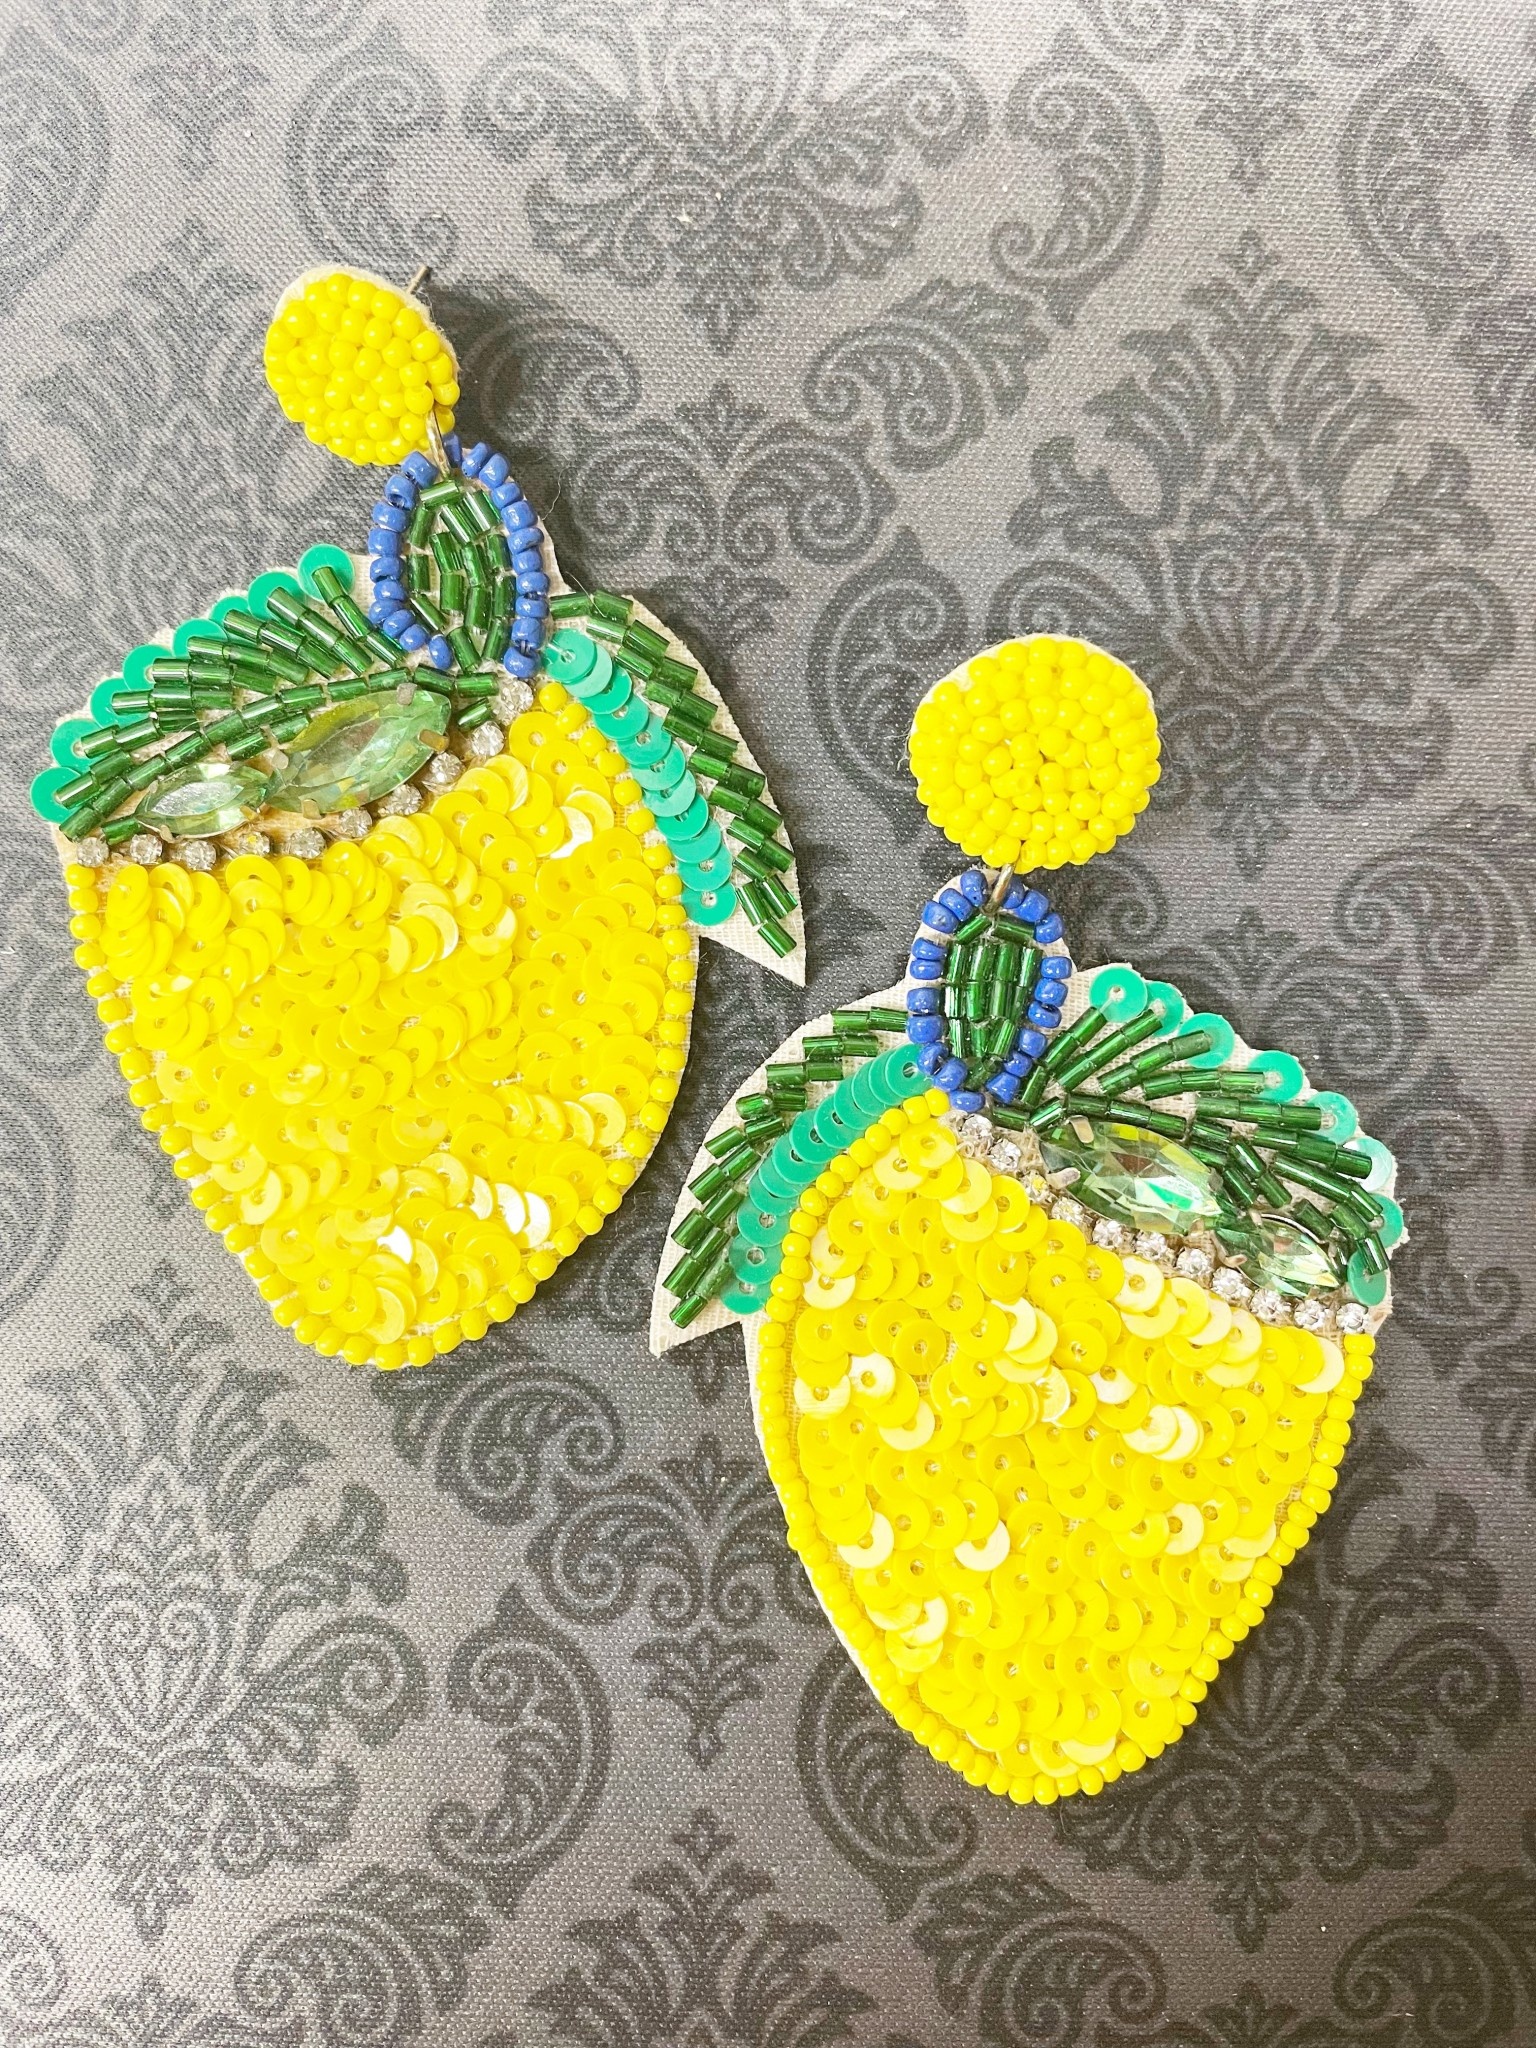 available at m. lynne designs Beaded Lemon with Sequins Earring